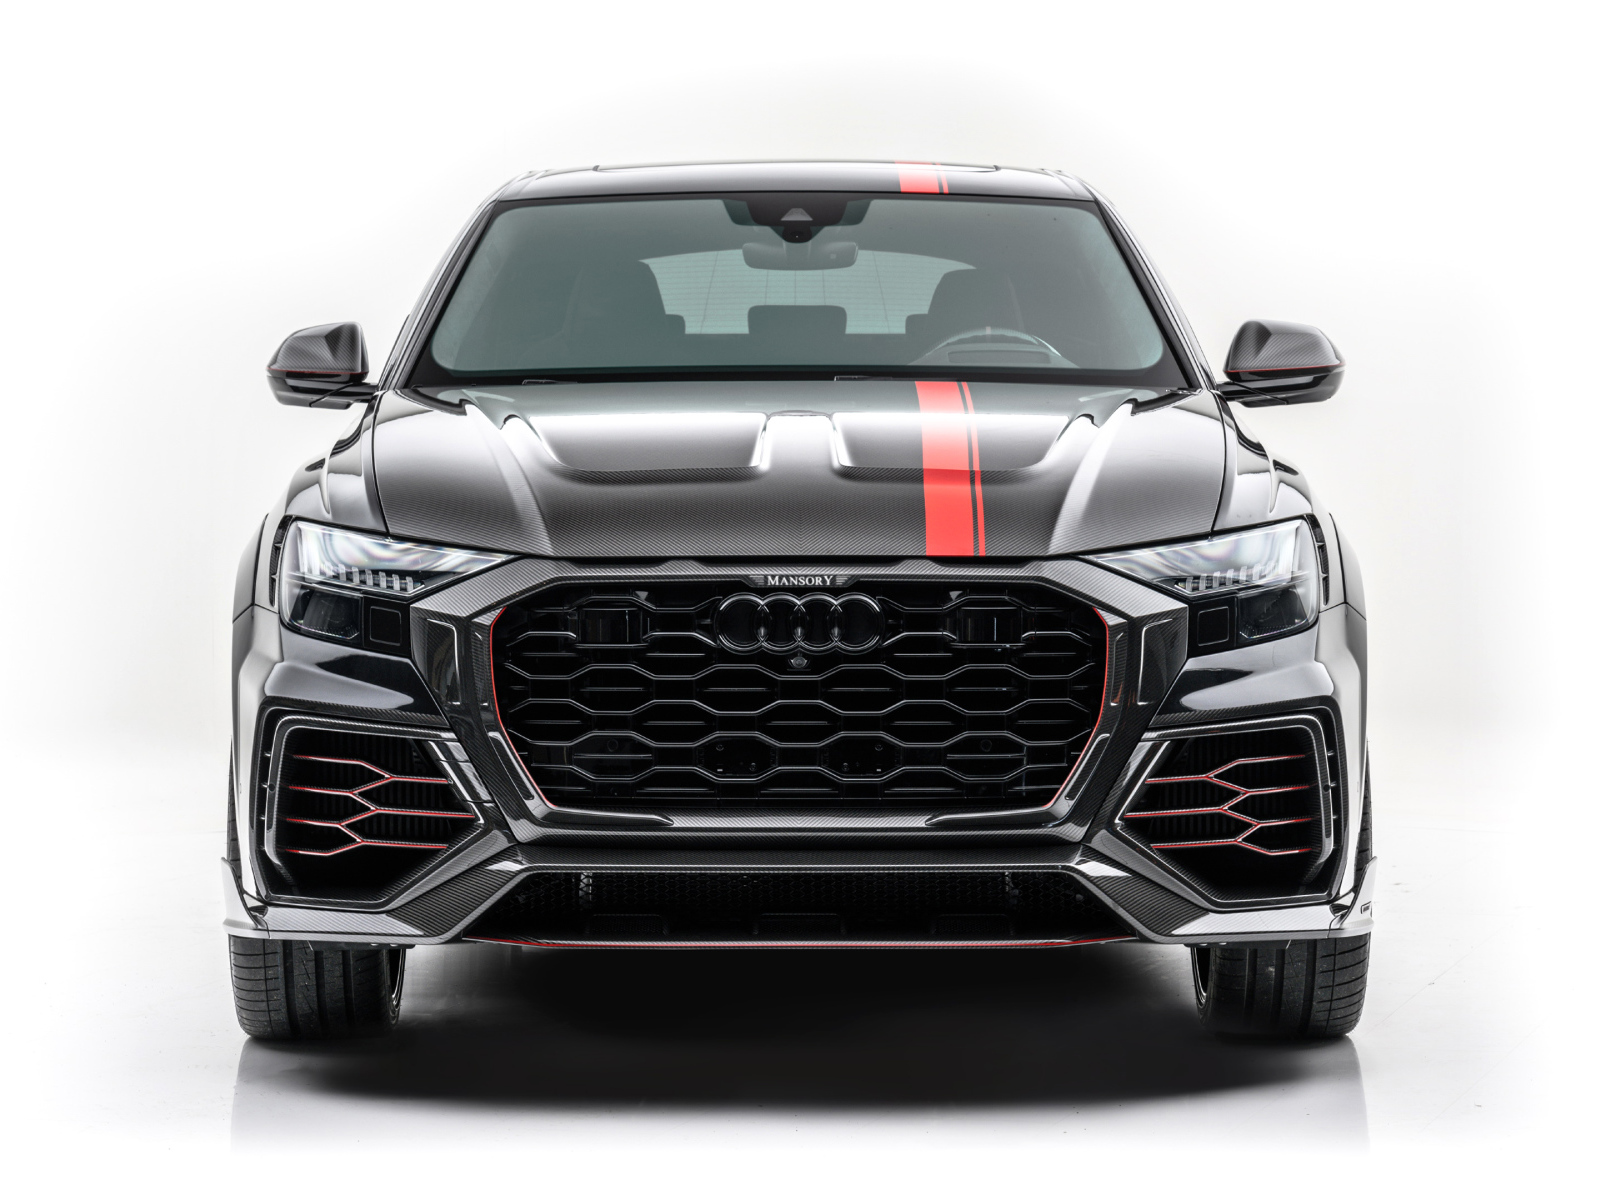 2020 Audi RS Q8 car front view on white background